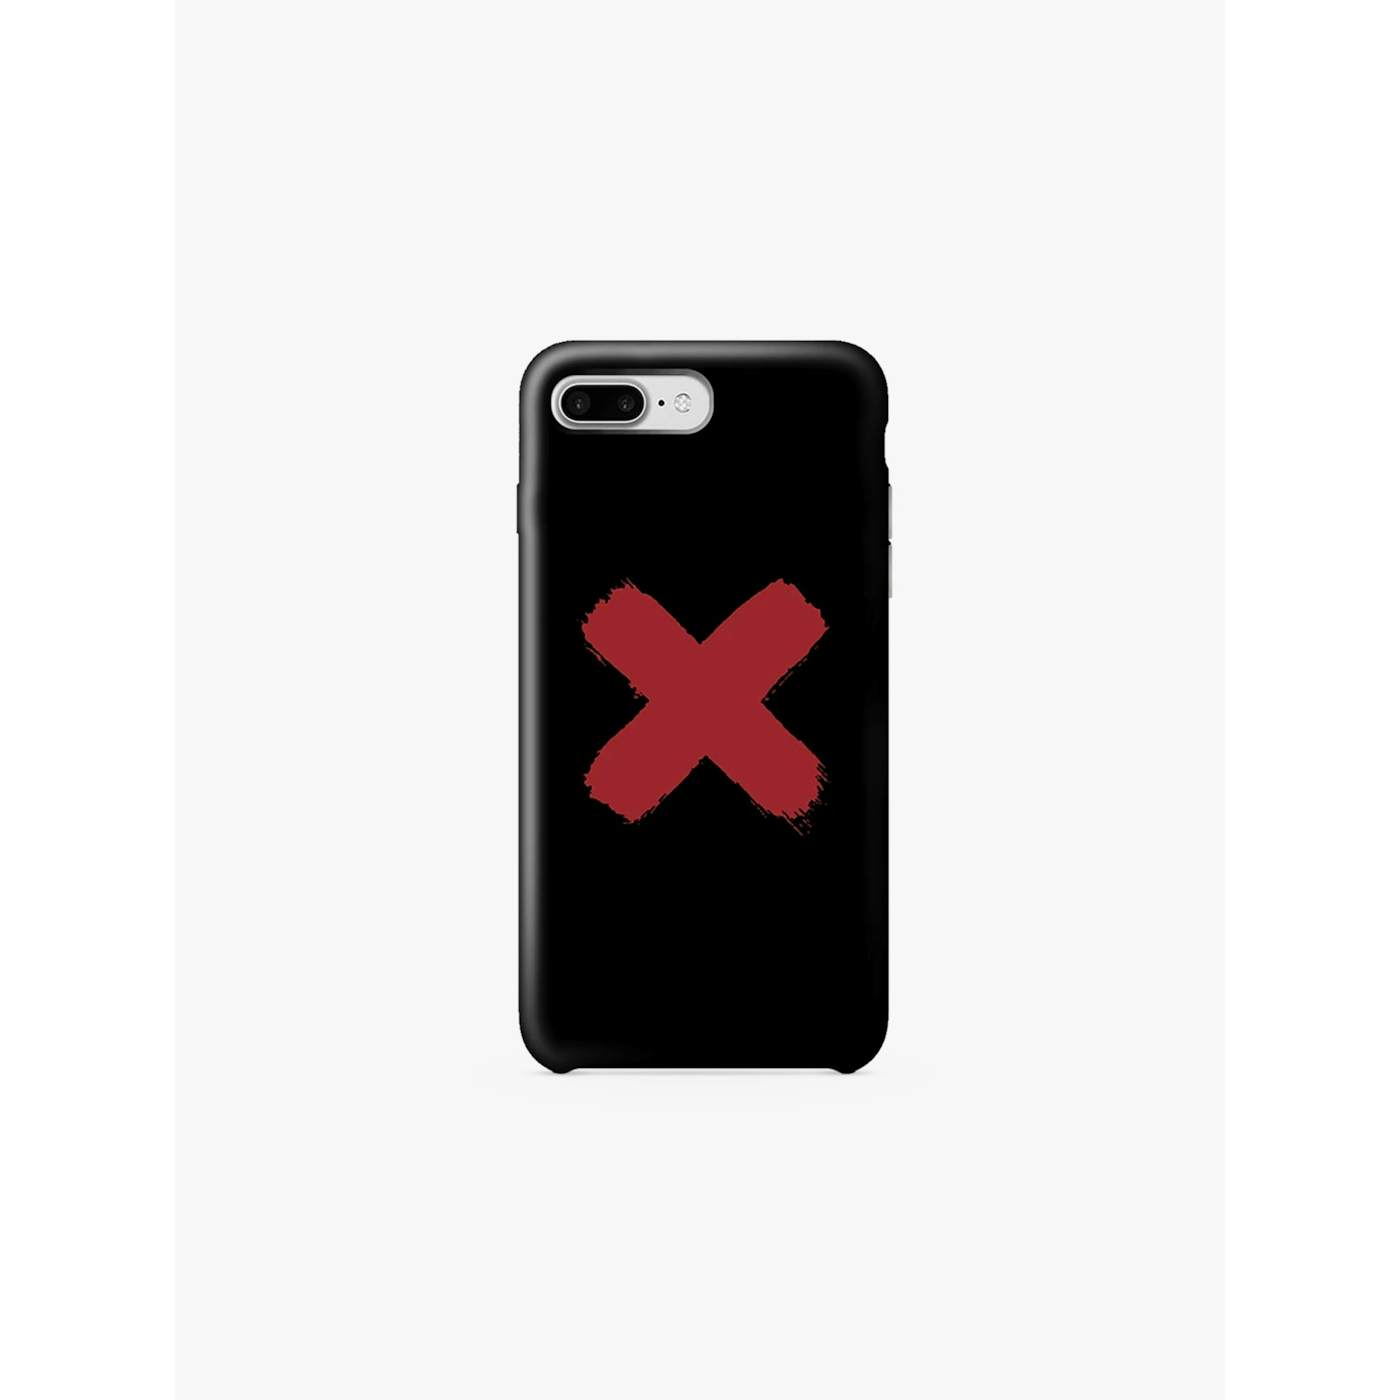 Kevin Hart X iPhone Case